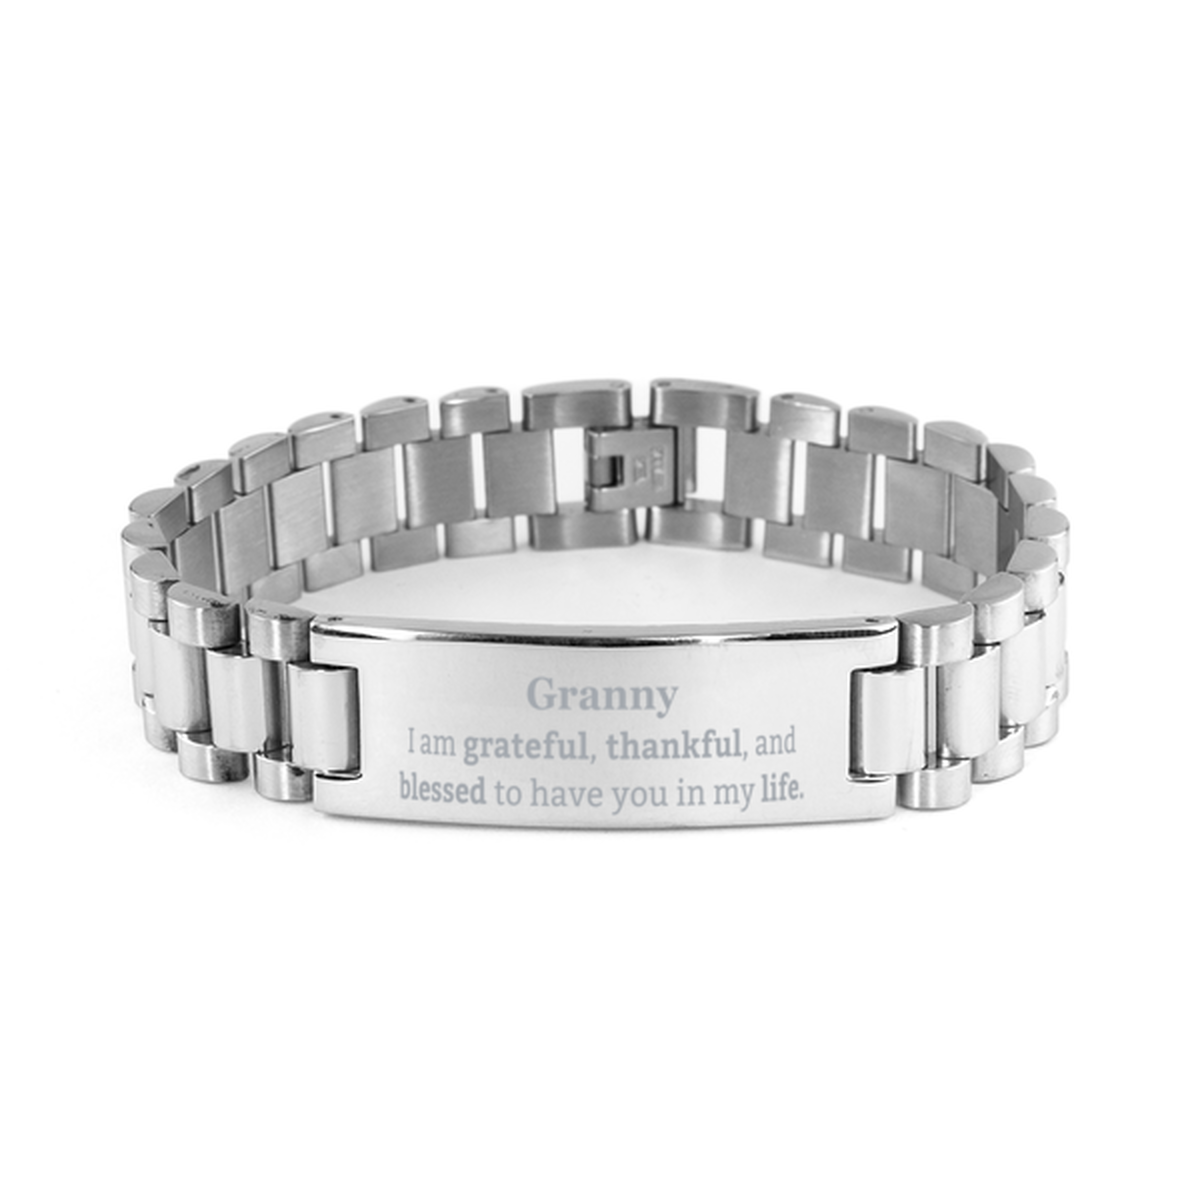 Granny Appreciation Gifts, I am grateful, thankful, and blessed, Thank You Ladder Stainless Steel Bracelet for Granny, Birthday Inspiration Gifts for Granny